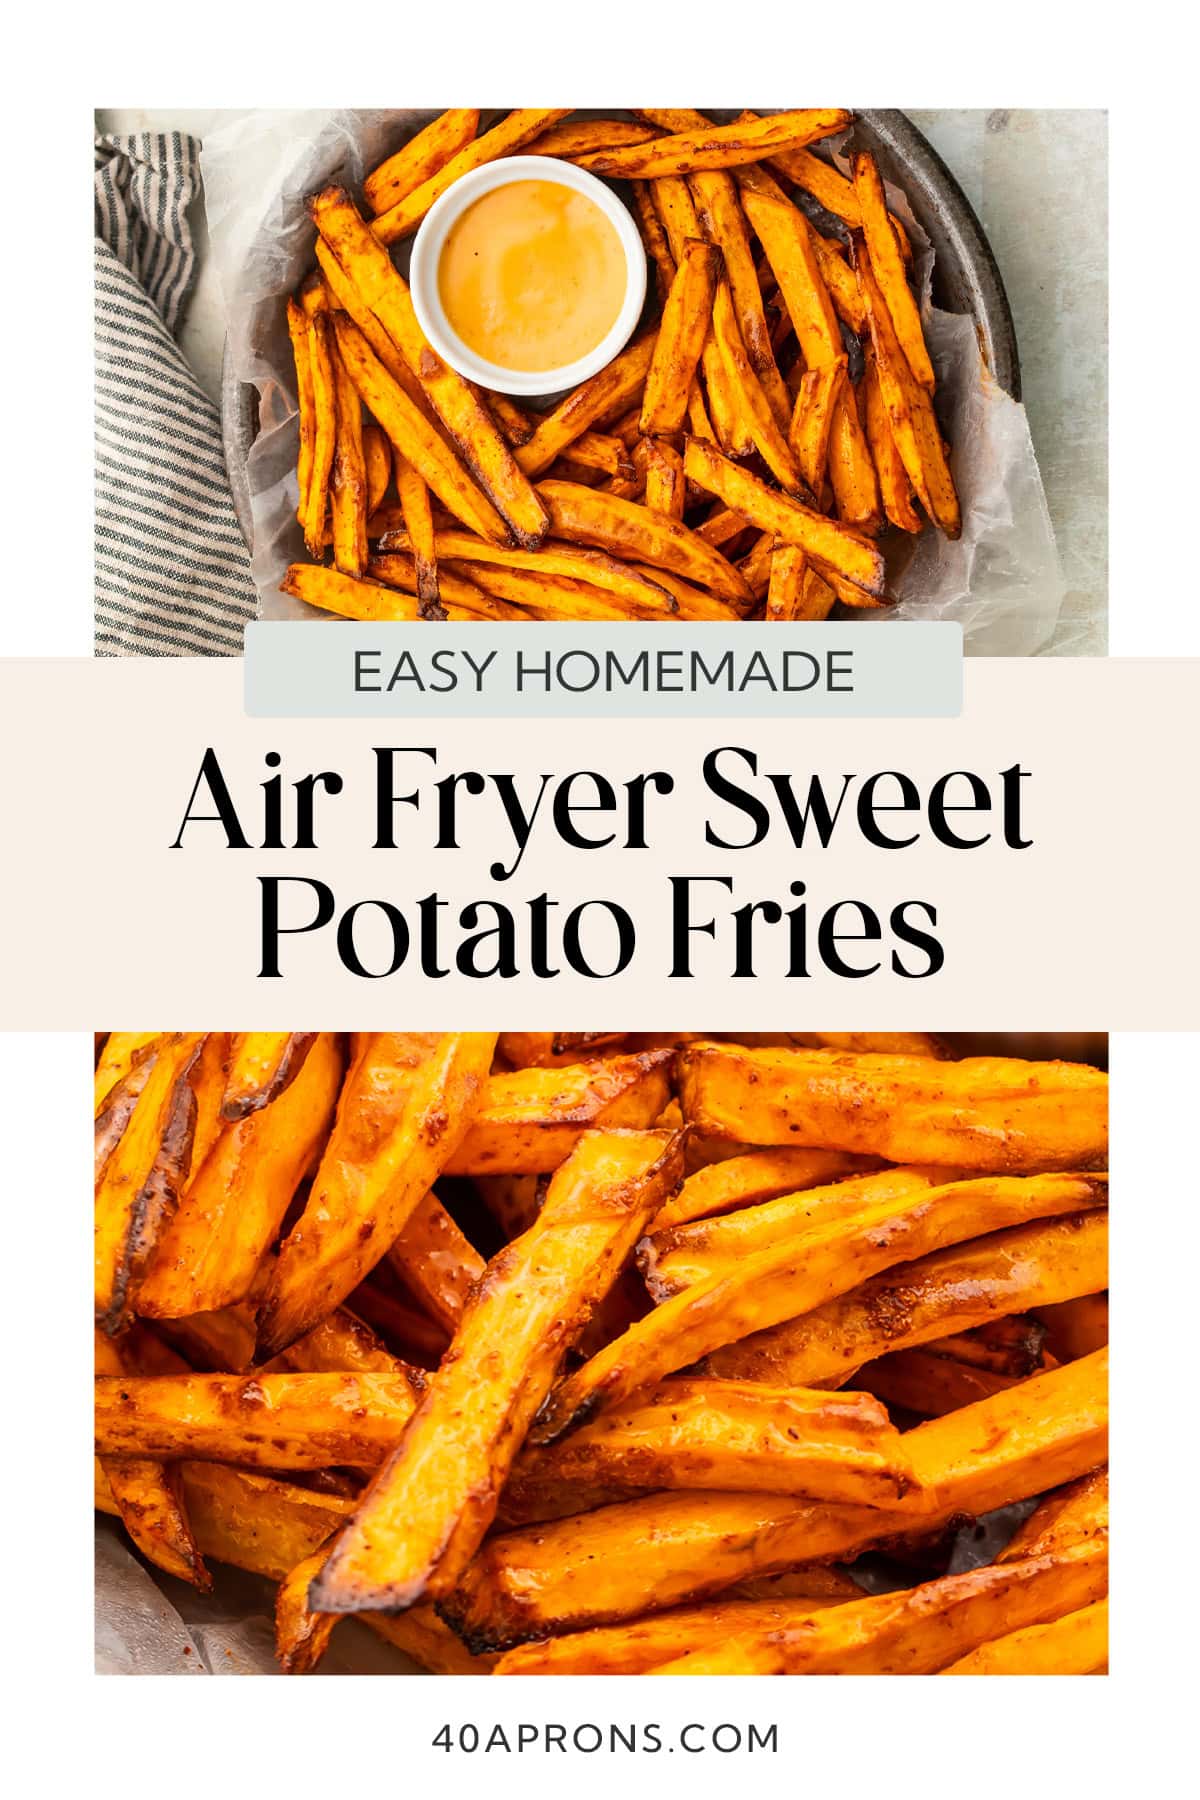 Pin graphic for air fryer sweet potato fries.